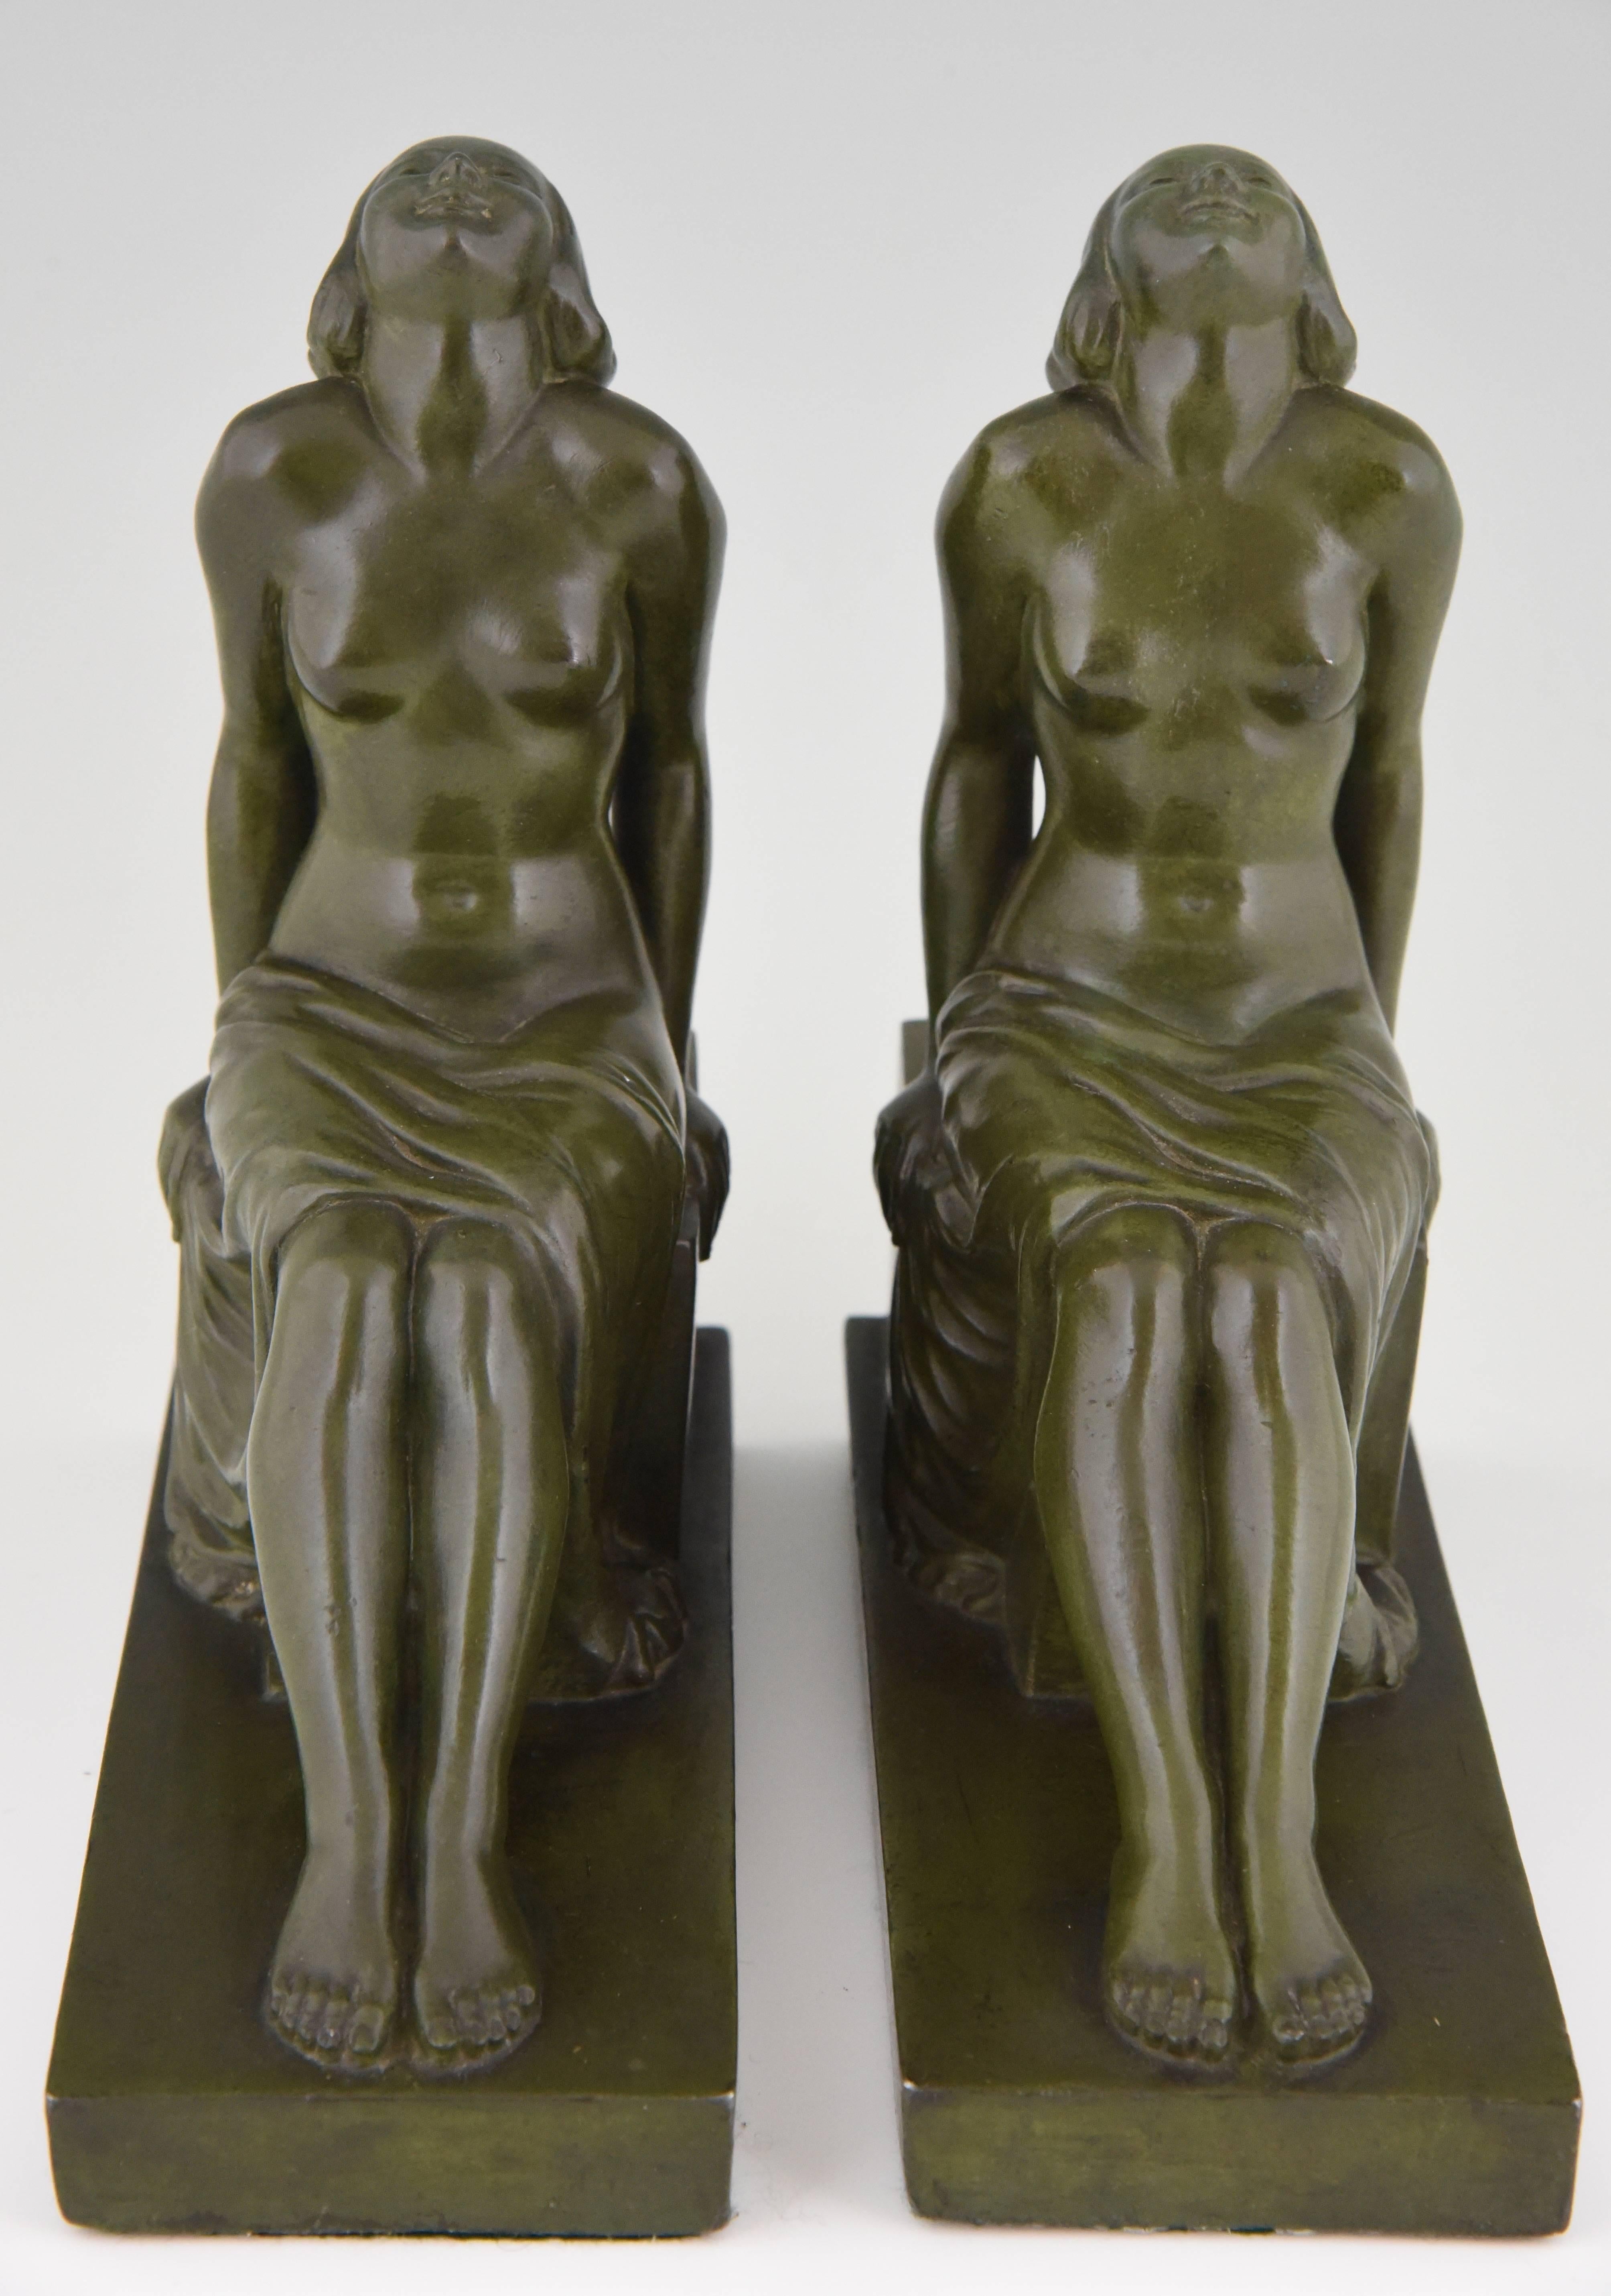 Metal French Art Deco Bookends Sitting Nudes by Janle, 1930